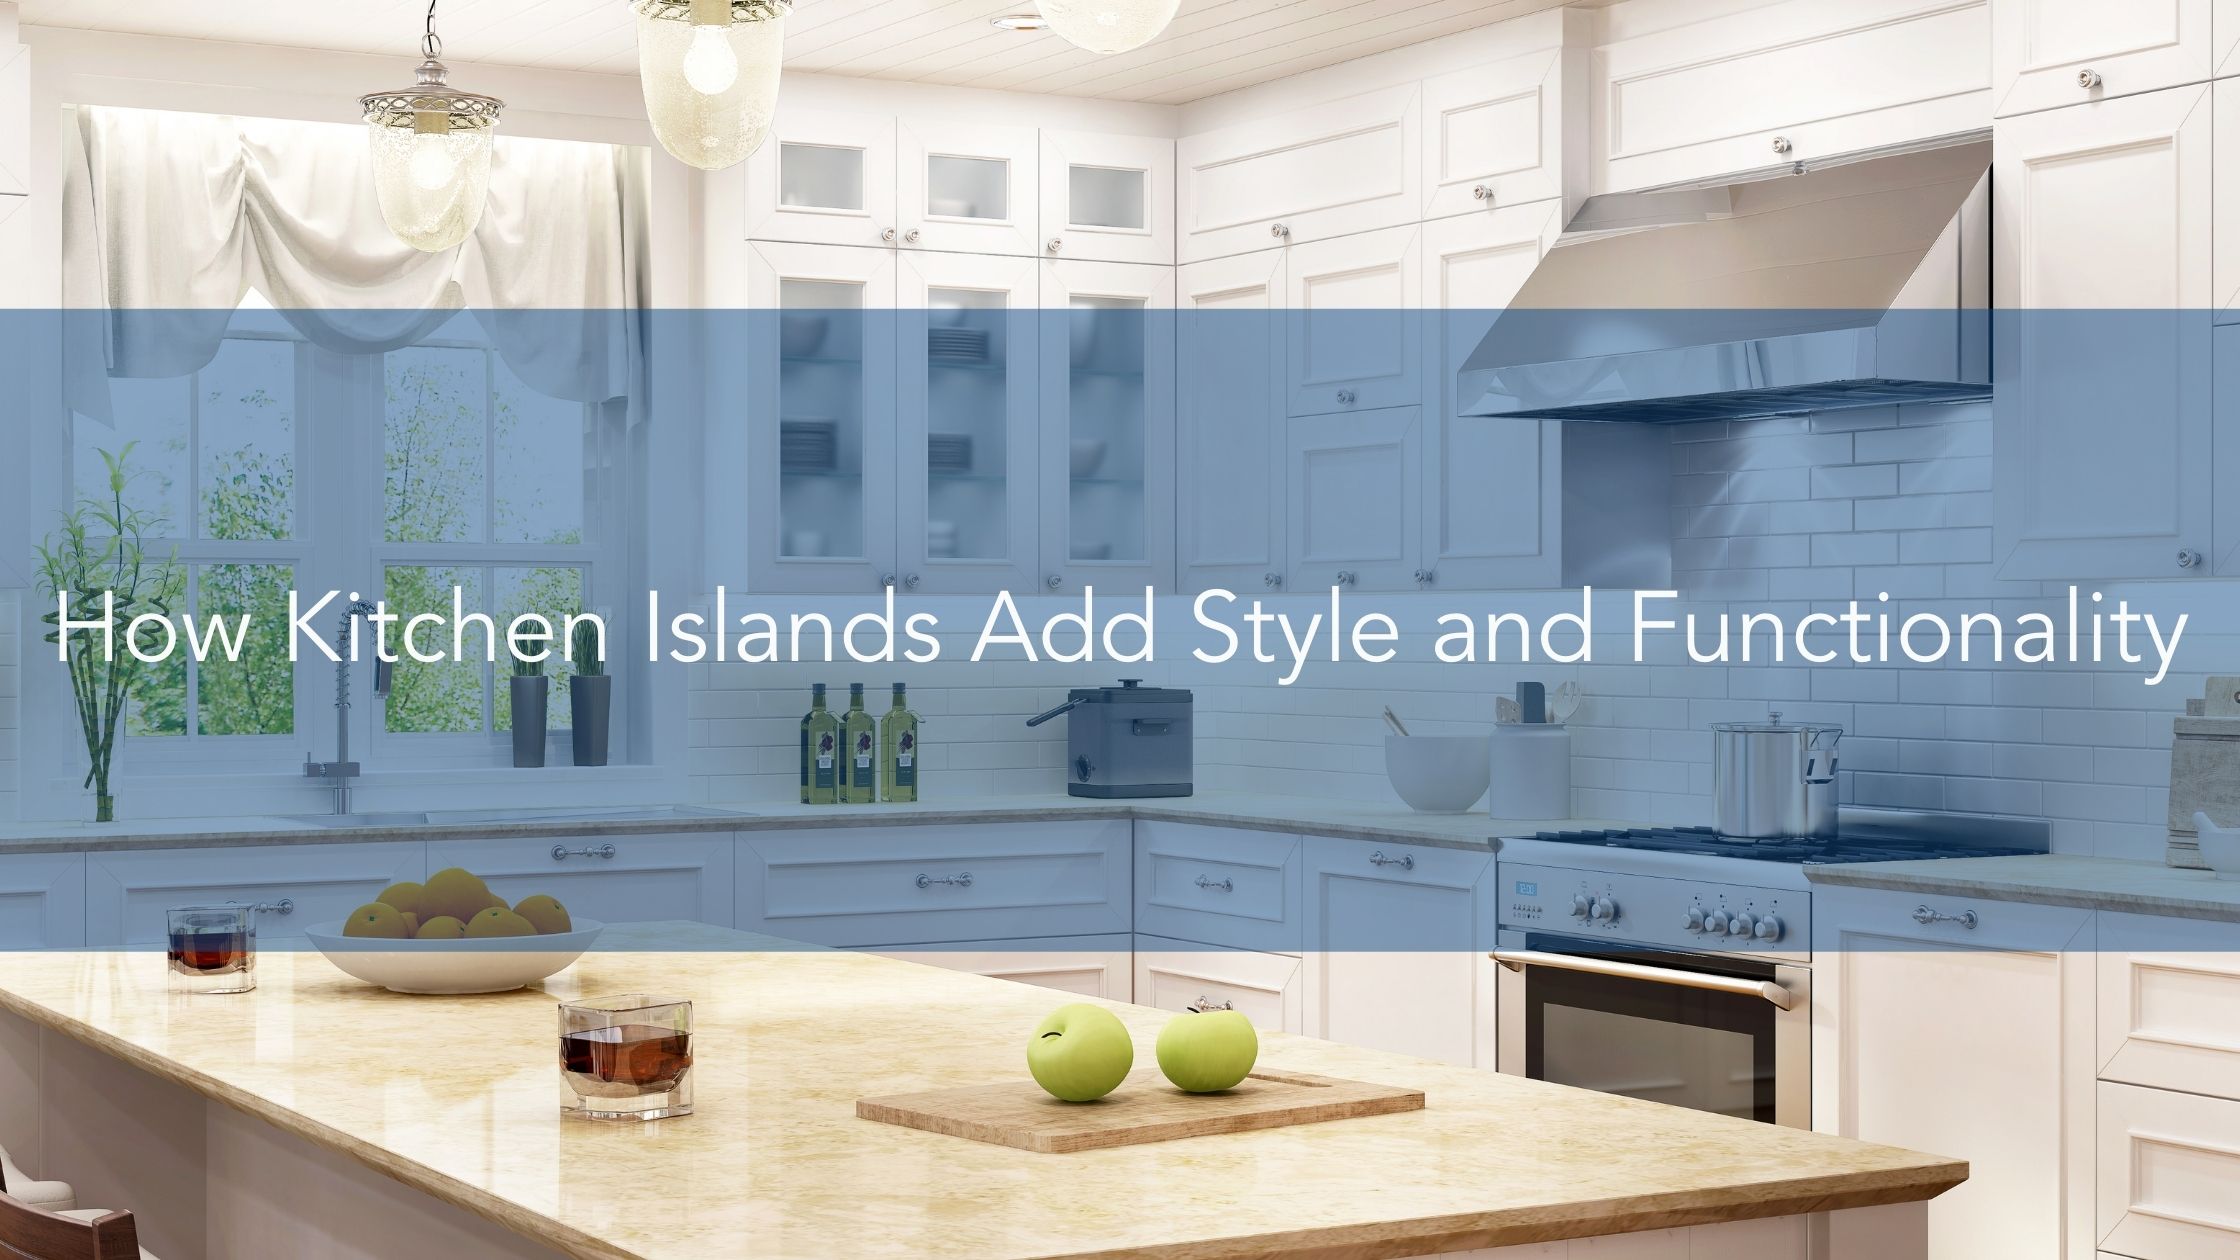 https://handymanconnection.com/wp-content/uploads/2022/05/How-Kitchen-Islands-Add-Style-and-Functionality.jpg